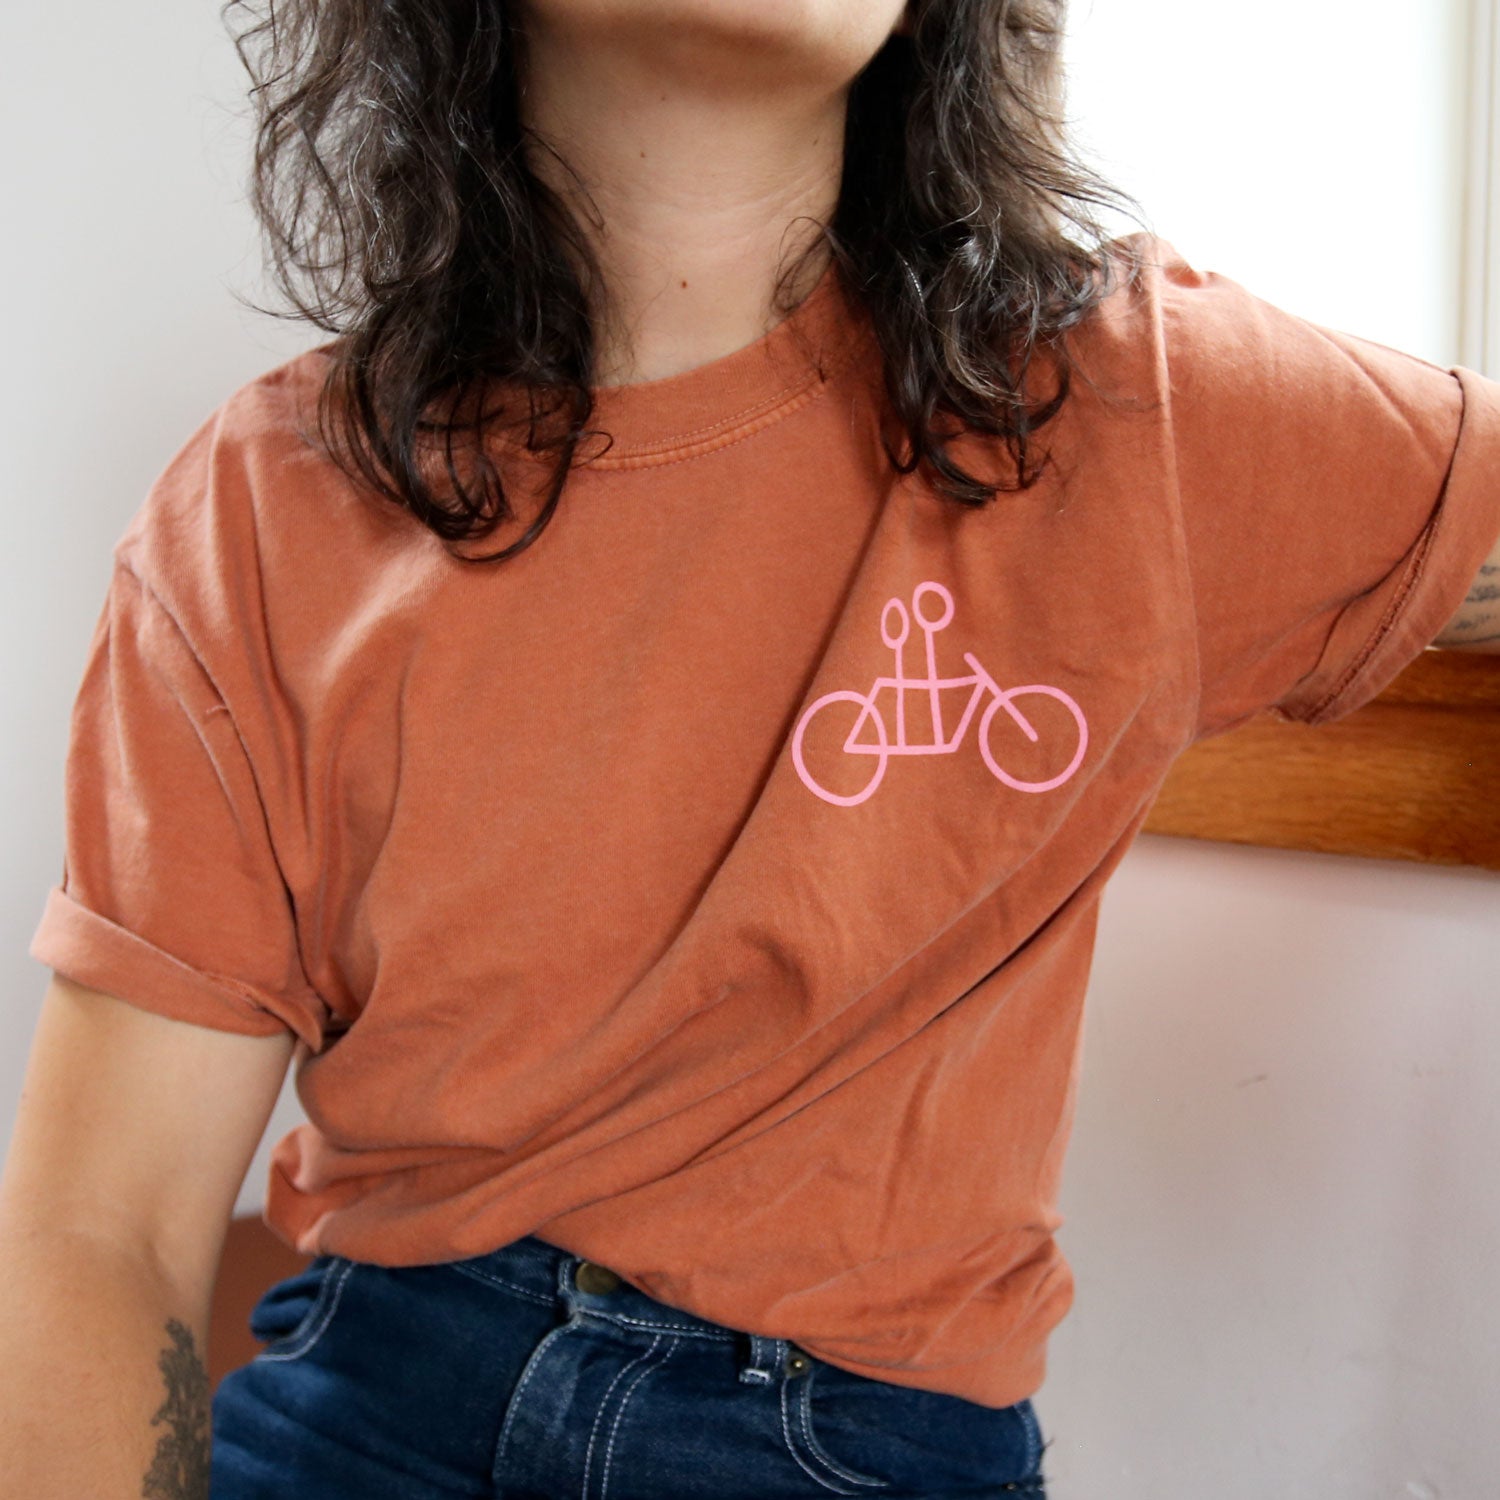 A person with long, wavy hair and wearing glasses stands against a plain background, looking slightly upwards and smiling. They are wearing a casual elegant, orange cotton Tandem Coffee Roasters Bike + Tandem Coffee Tee with a pink bicycle graphic and have tattoos on their left arm. Their hands are behind their back.